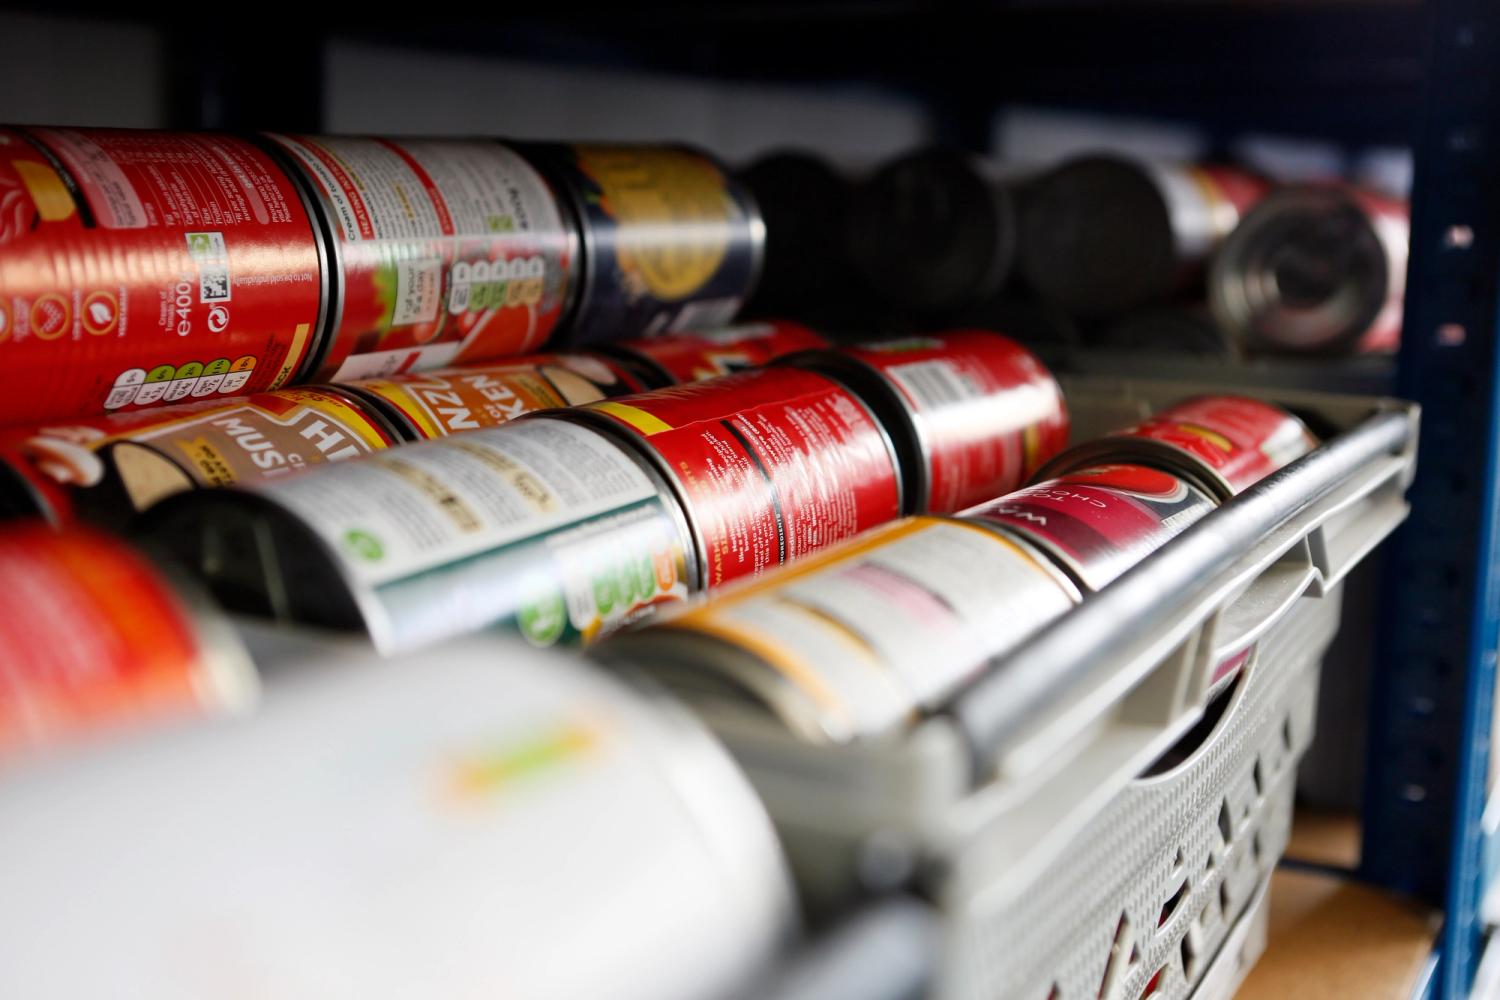 Cans stacked in large plastic trays on a shelf in a food bank